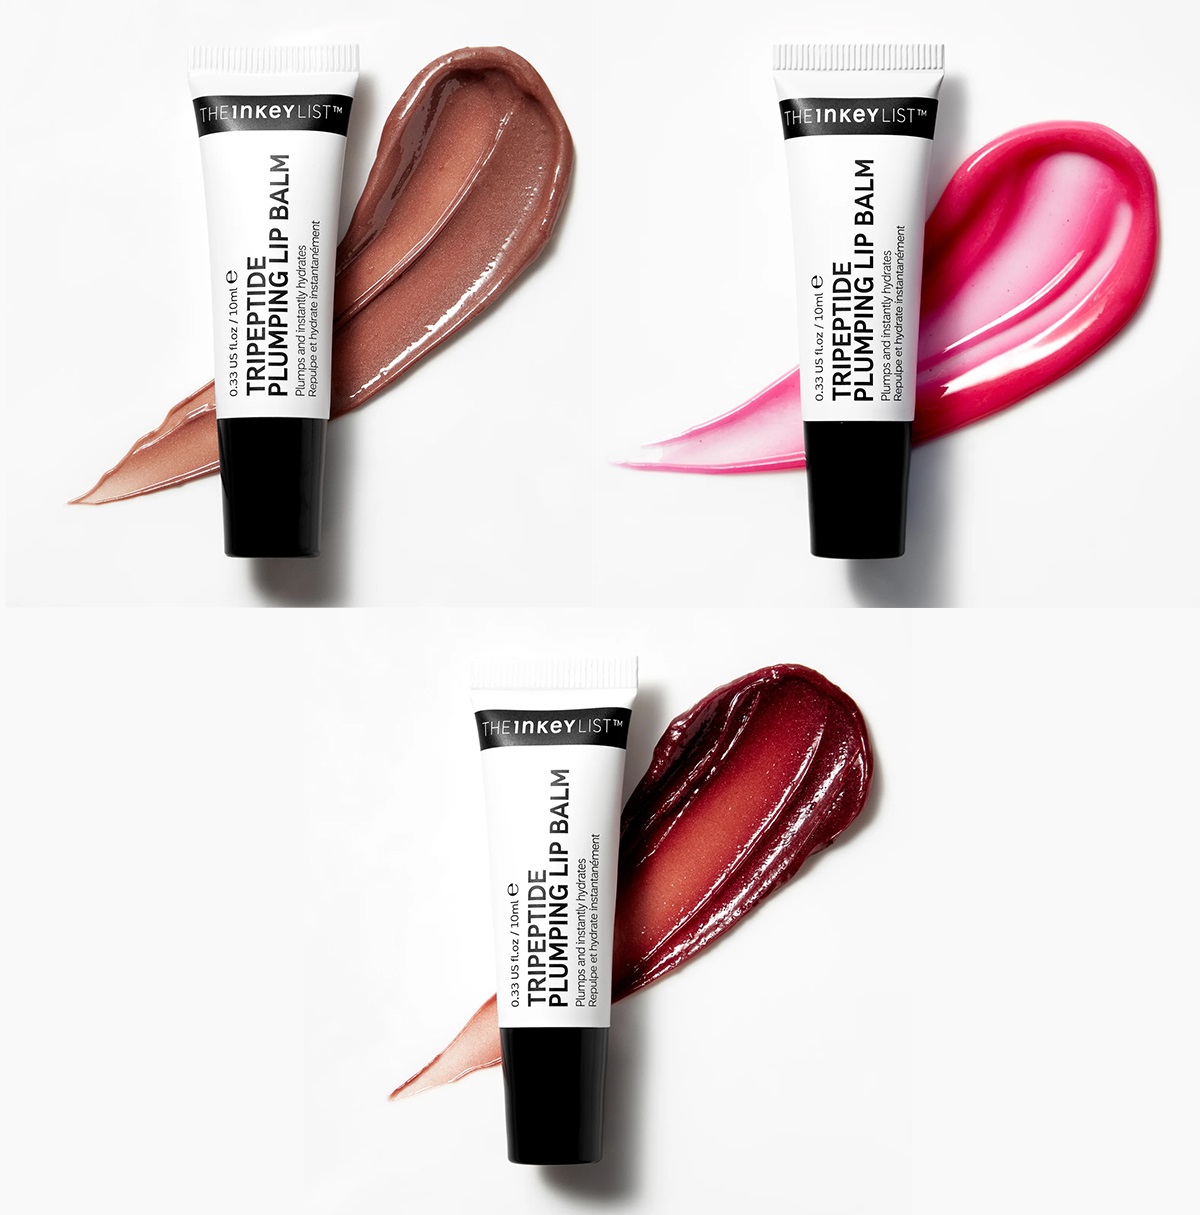 The INKEY List has annpunced new shades of the Tripeptide Plumping Lip Balm